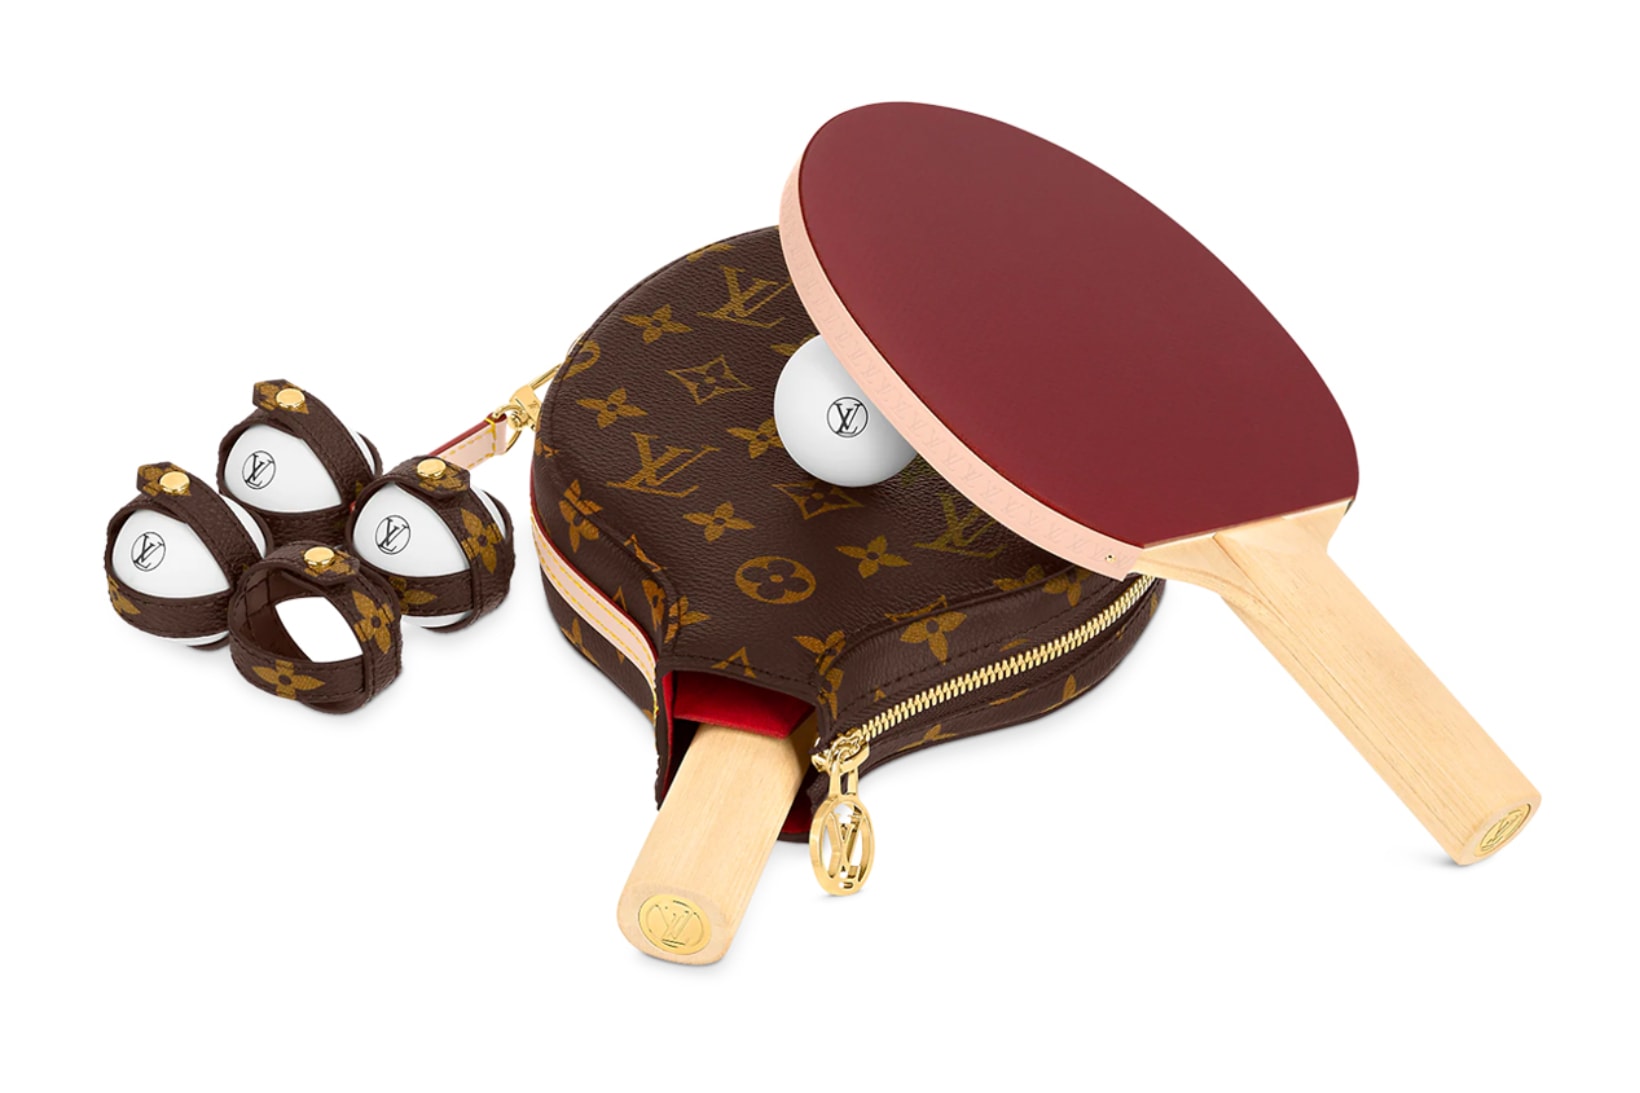 Louis Vuitton James Ping Pong Set 2280 USD Product Sports Accessories